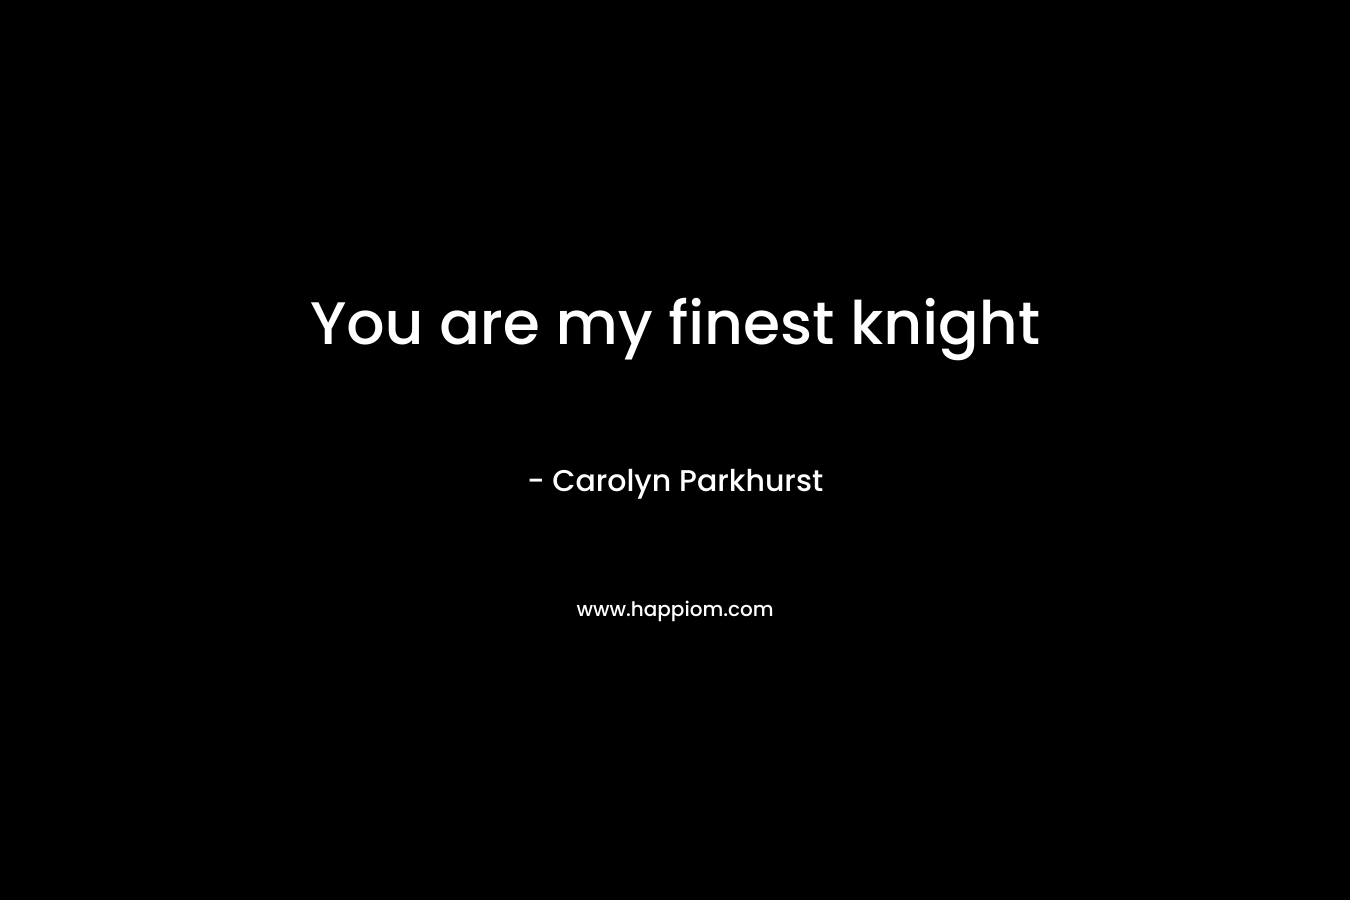 You are my finest knight